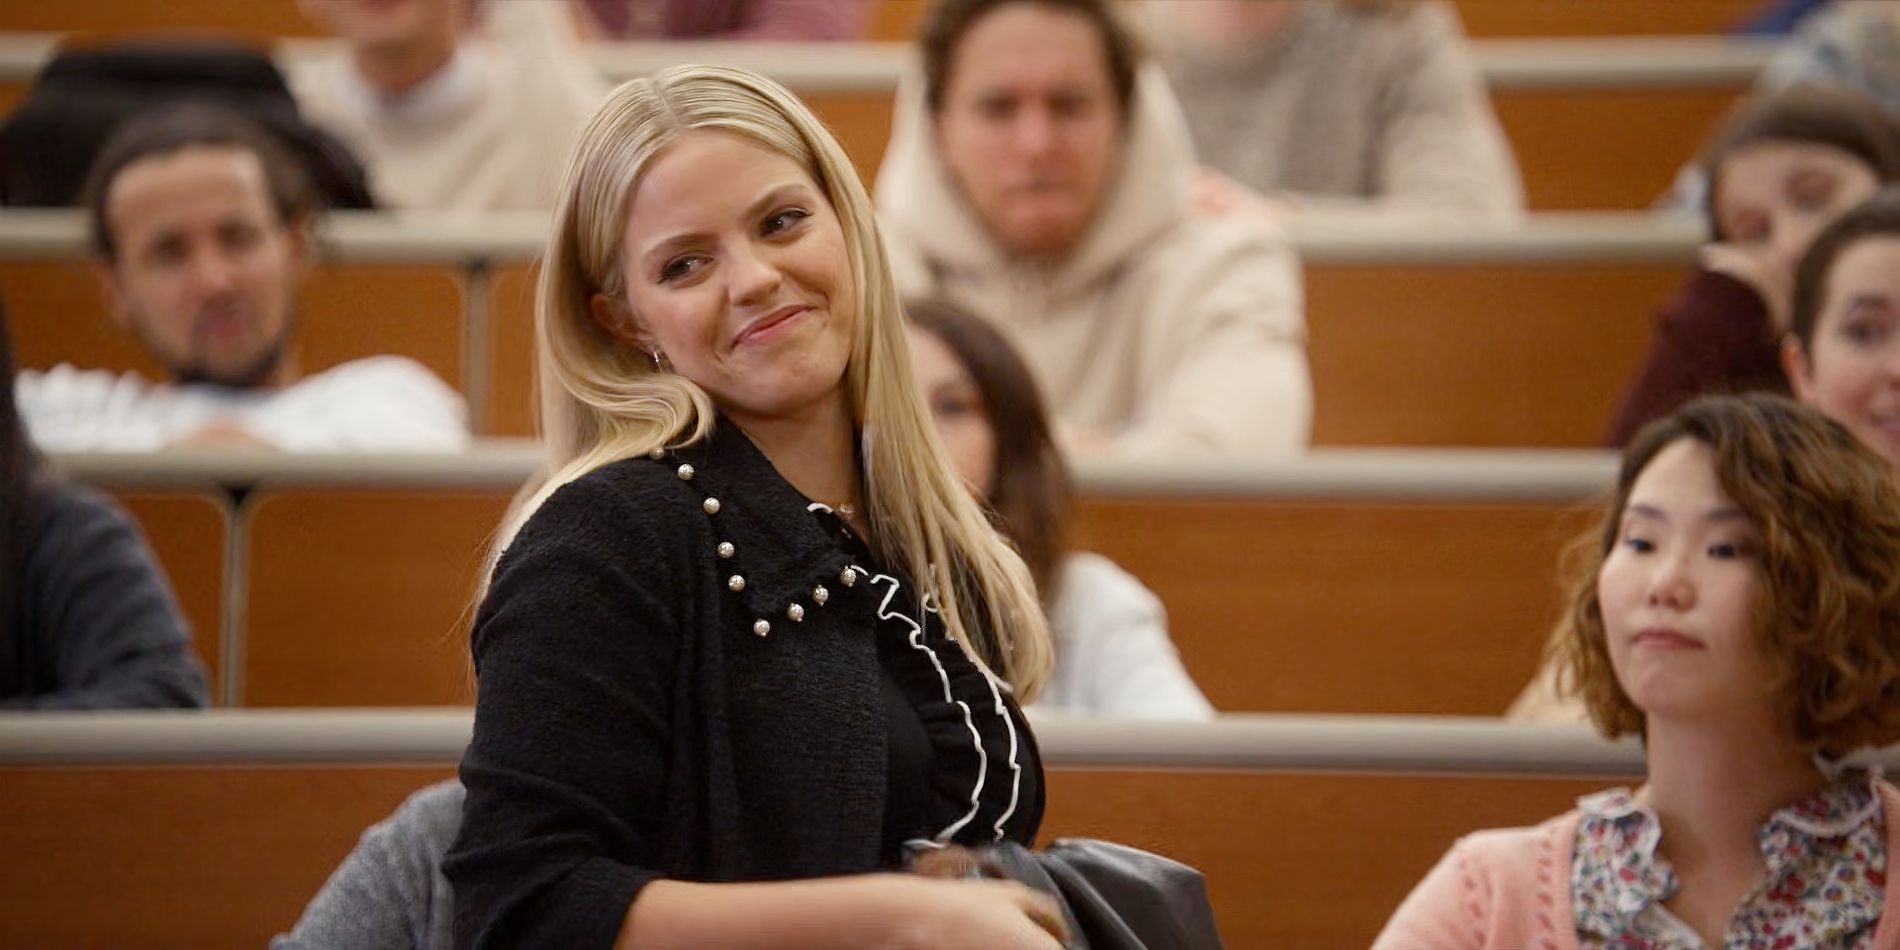 Renee Rapp as Leighton Murray in Sex Lives of College Girls in the classroom after the professor's announcement.